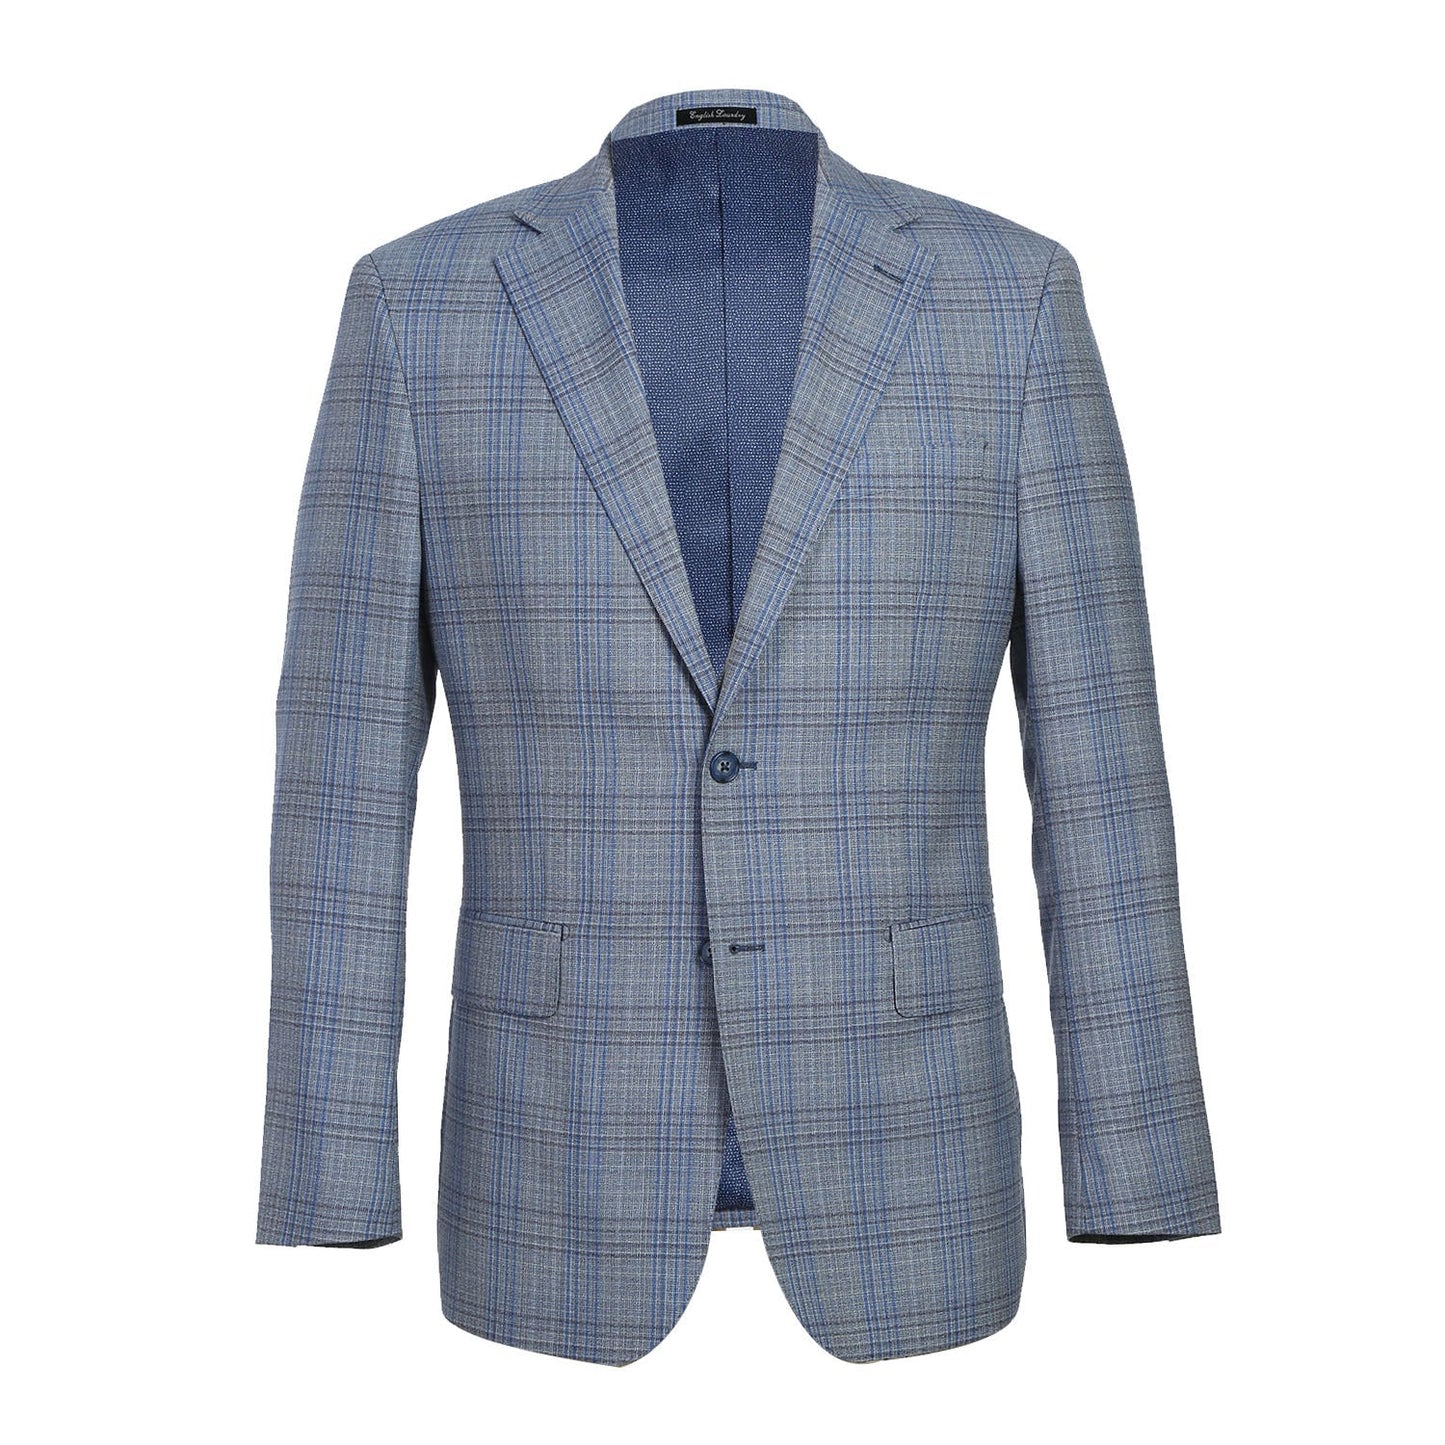 EL72-68-401 Slim Fit English Laundry Light Gray with Blue Check Wool Suit